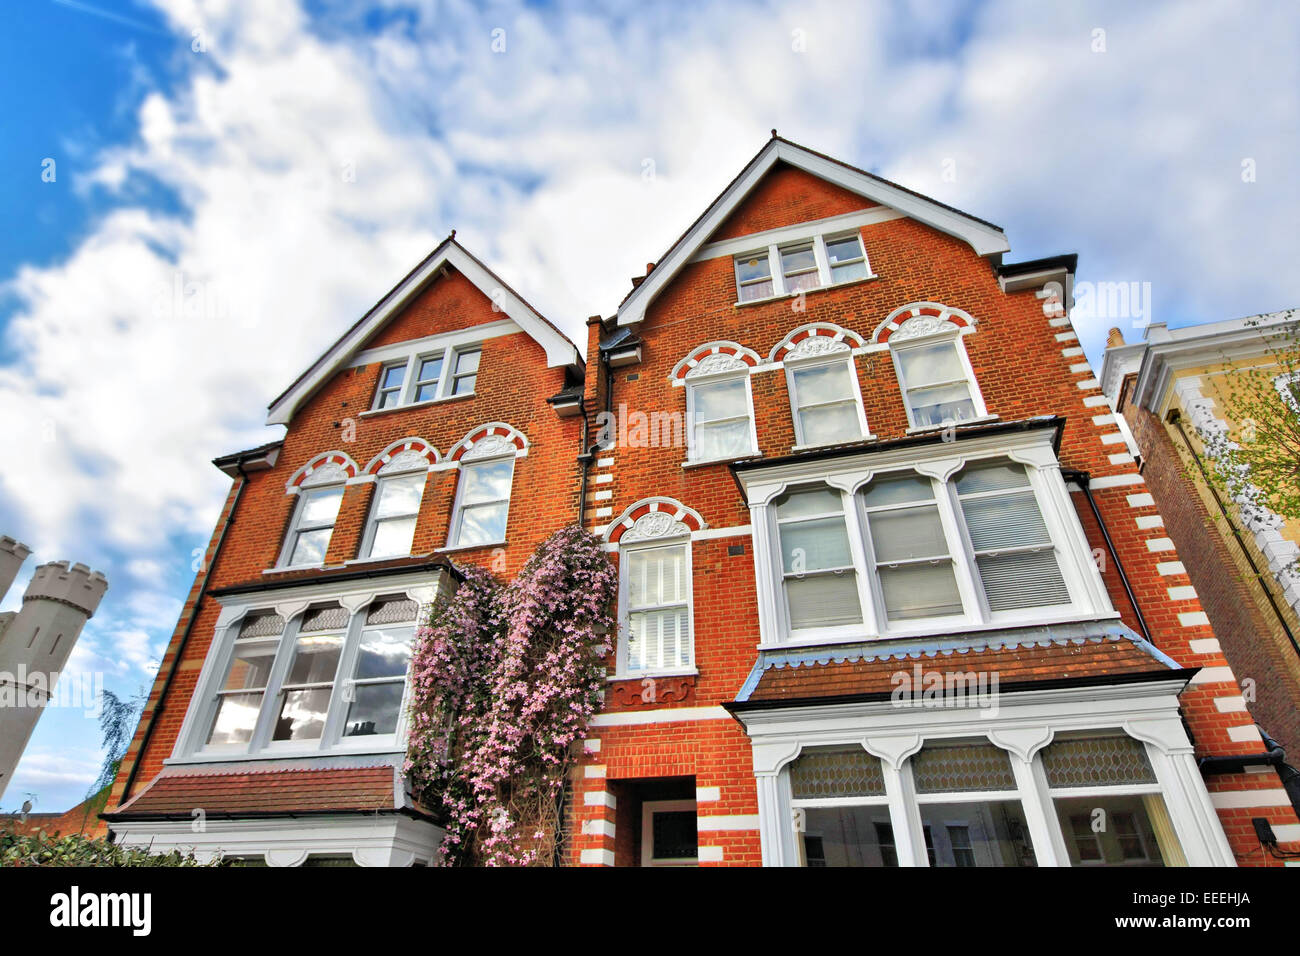 Typical British Houses against blue sky Stock Photo